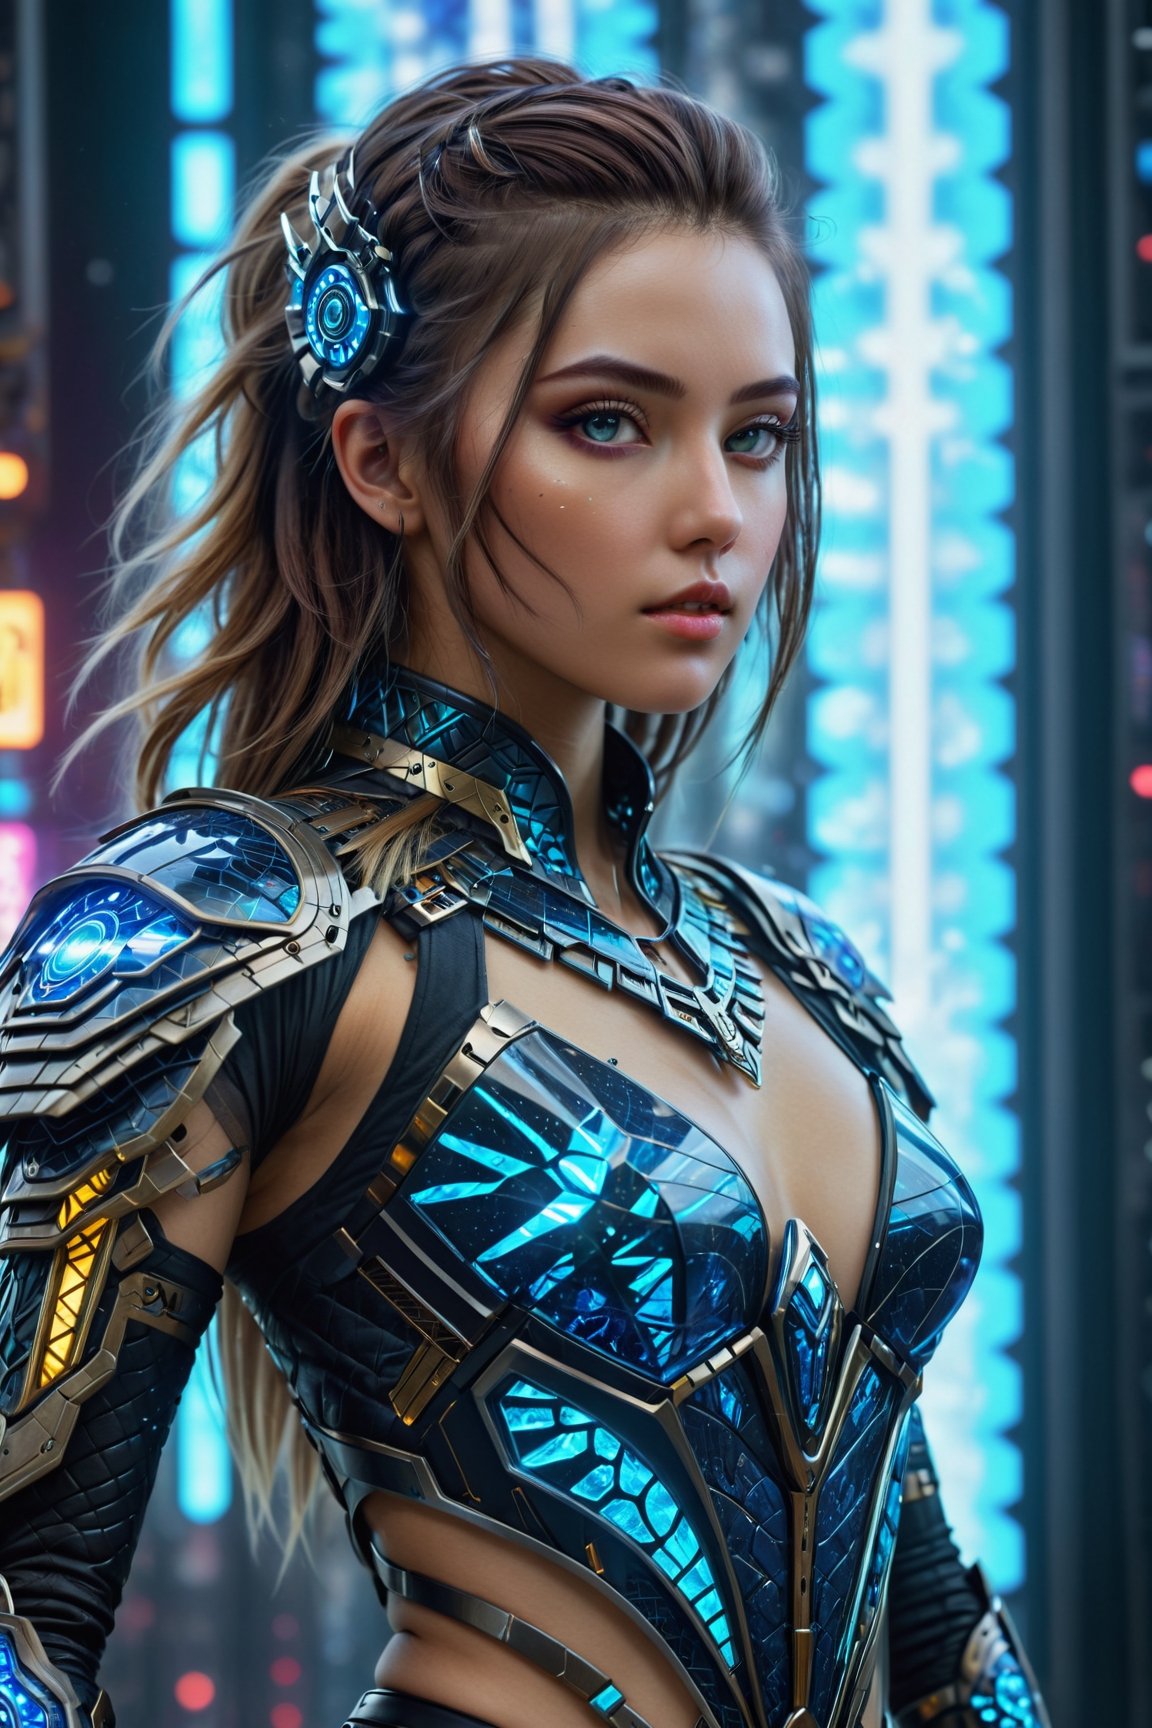 ((Generate hyper realistic image of captivating scene featuring a stunning sexy and seductive cyberpunk semi robotic girl, (high quality), masterpiece, (intricate details) blue fractal light efect, highly detailed, vibrant, production film, ultra high quality, photography style, (((Image in warm tones,))) Extremely Realistic,F41Arm0rXL 